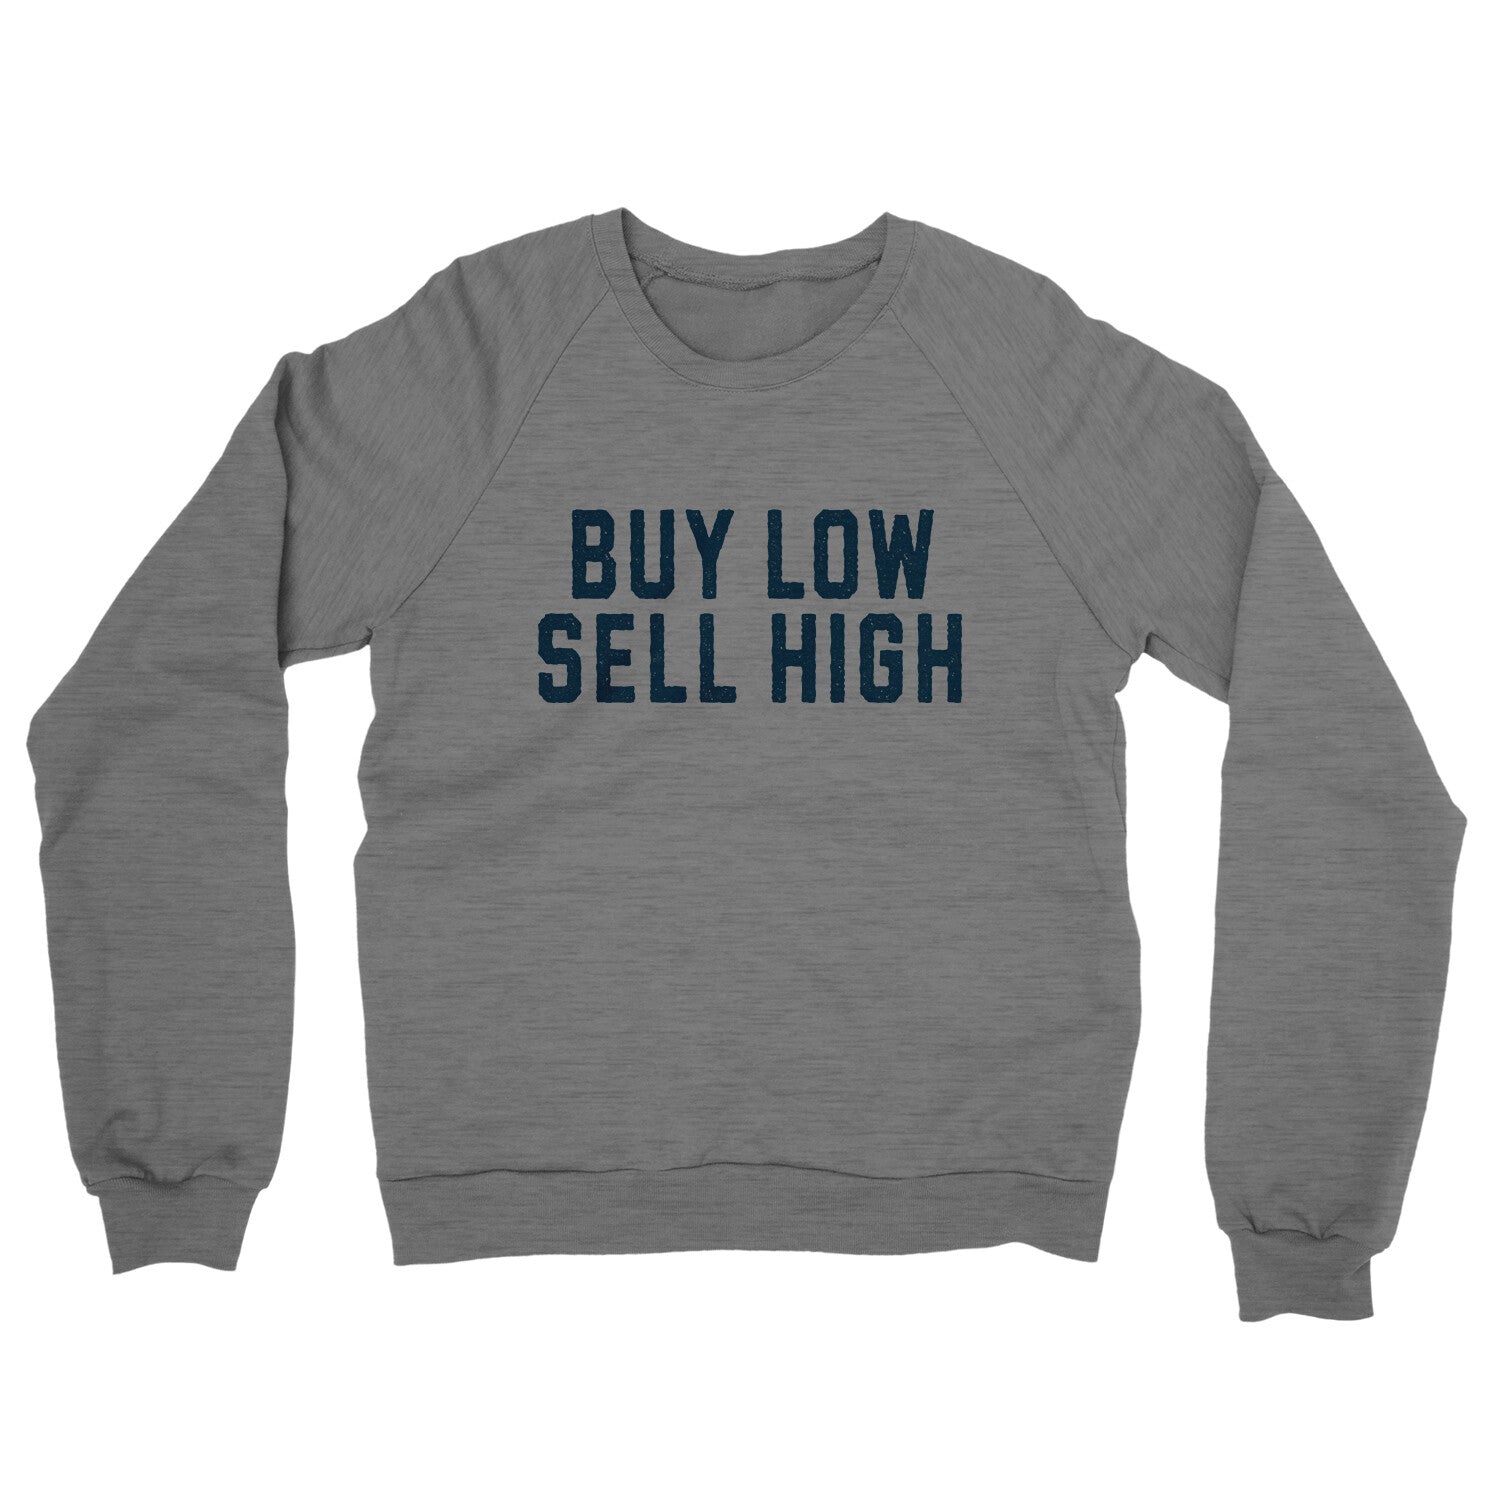 Buy Low Sell High in Graphite Heather Color